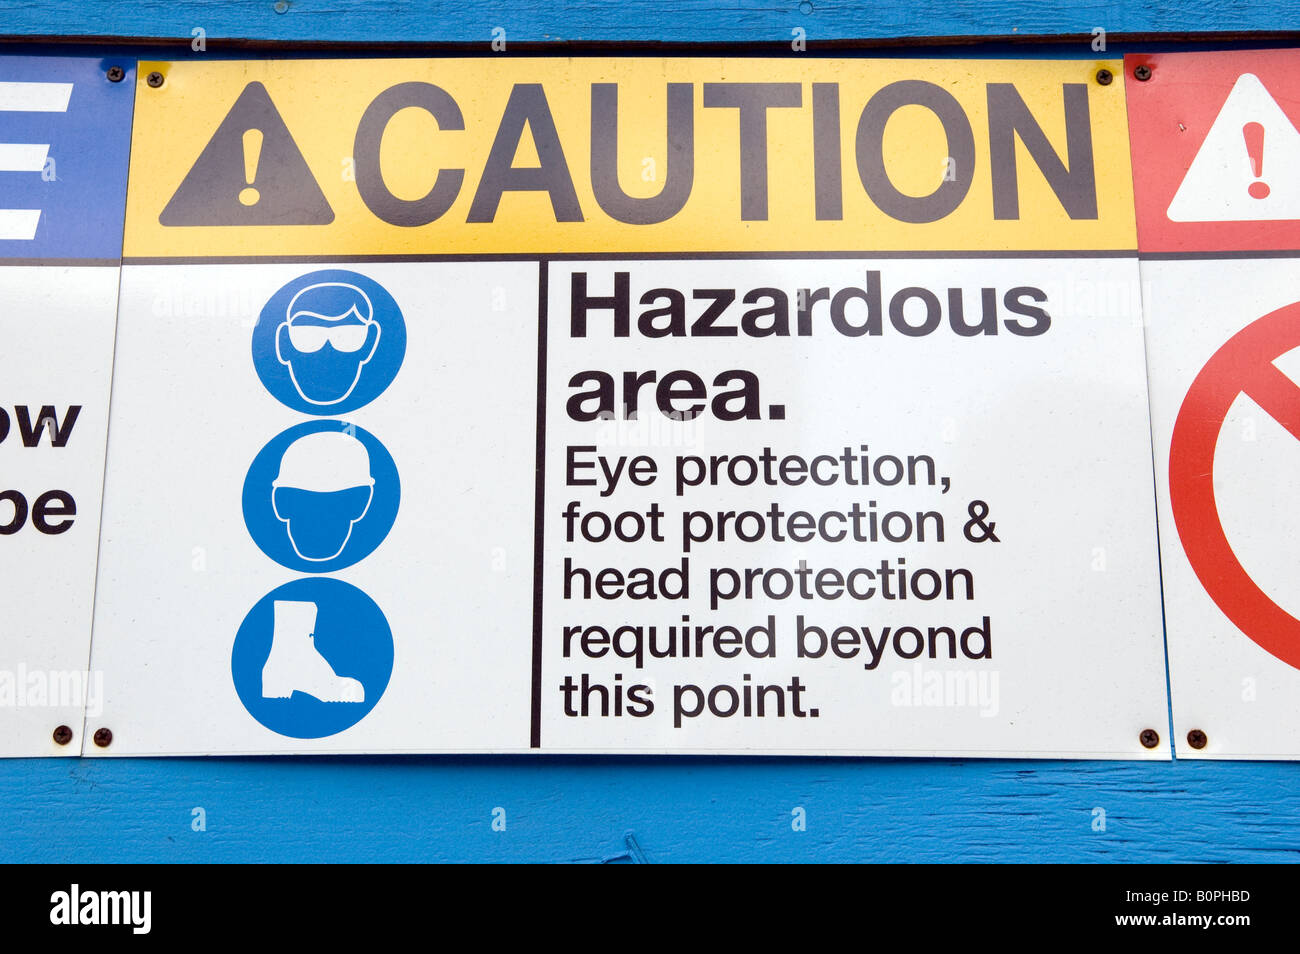 Various safety reminder signs at a construction site in New York Stock Photo